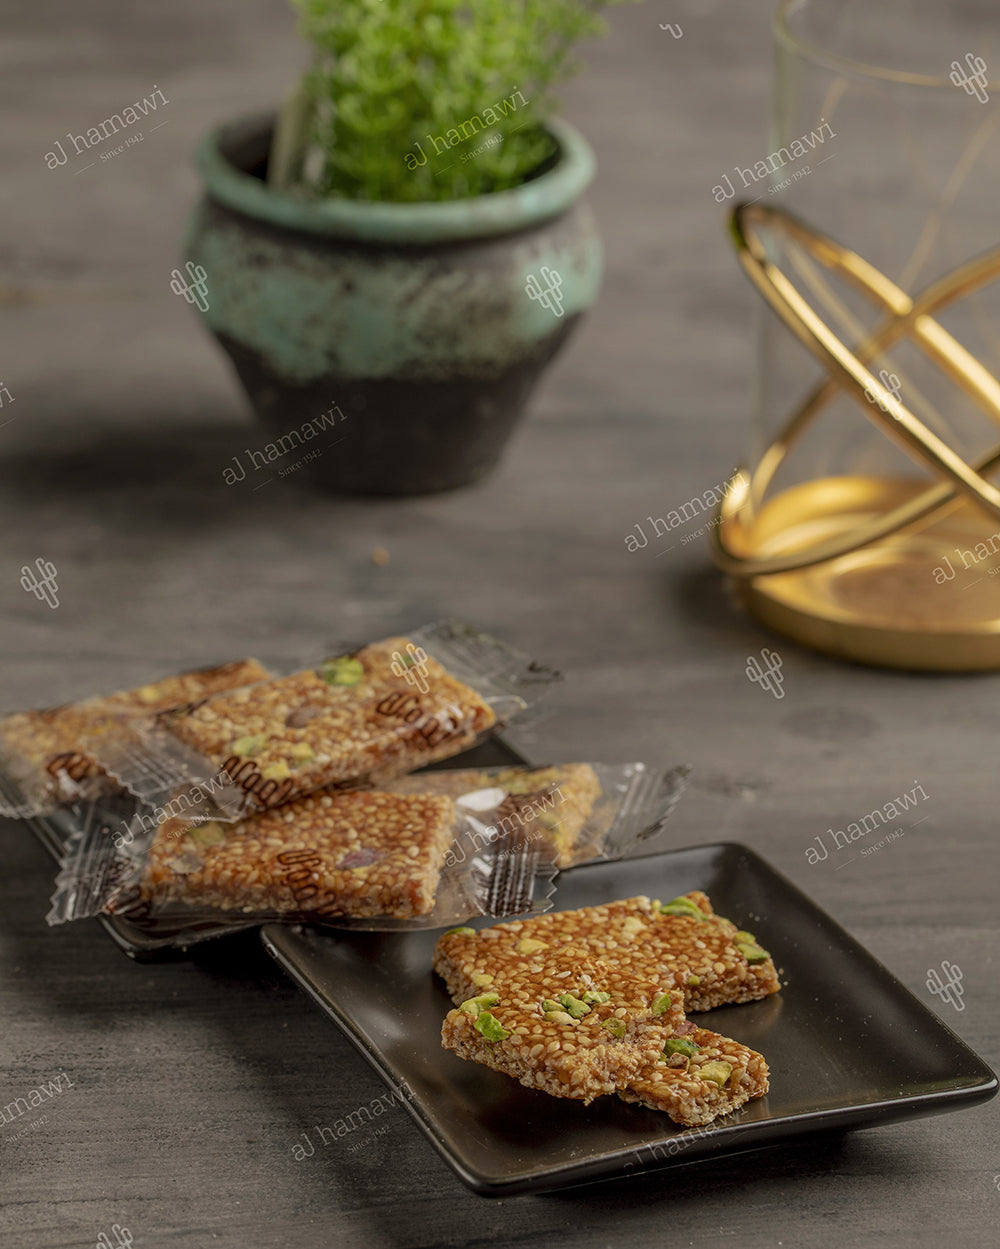 Sesame Sweets with Pistachio